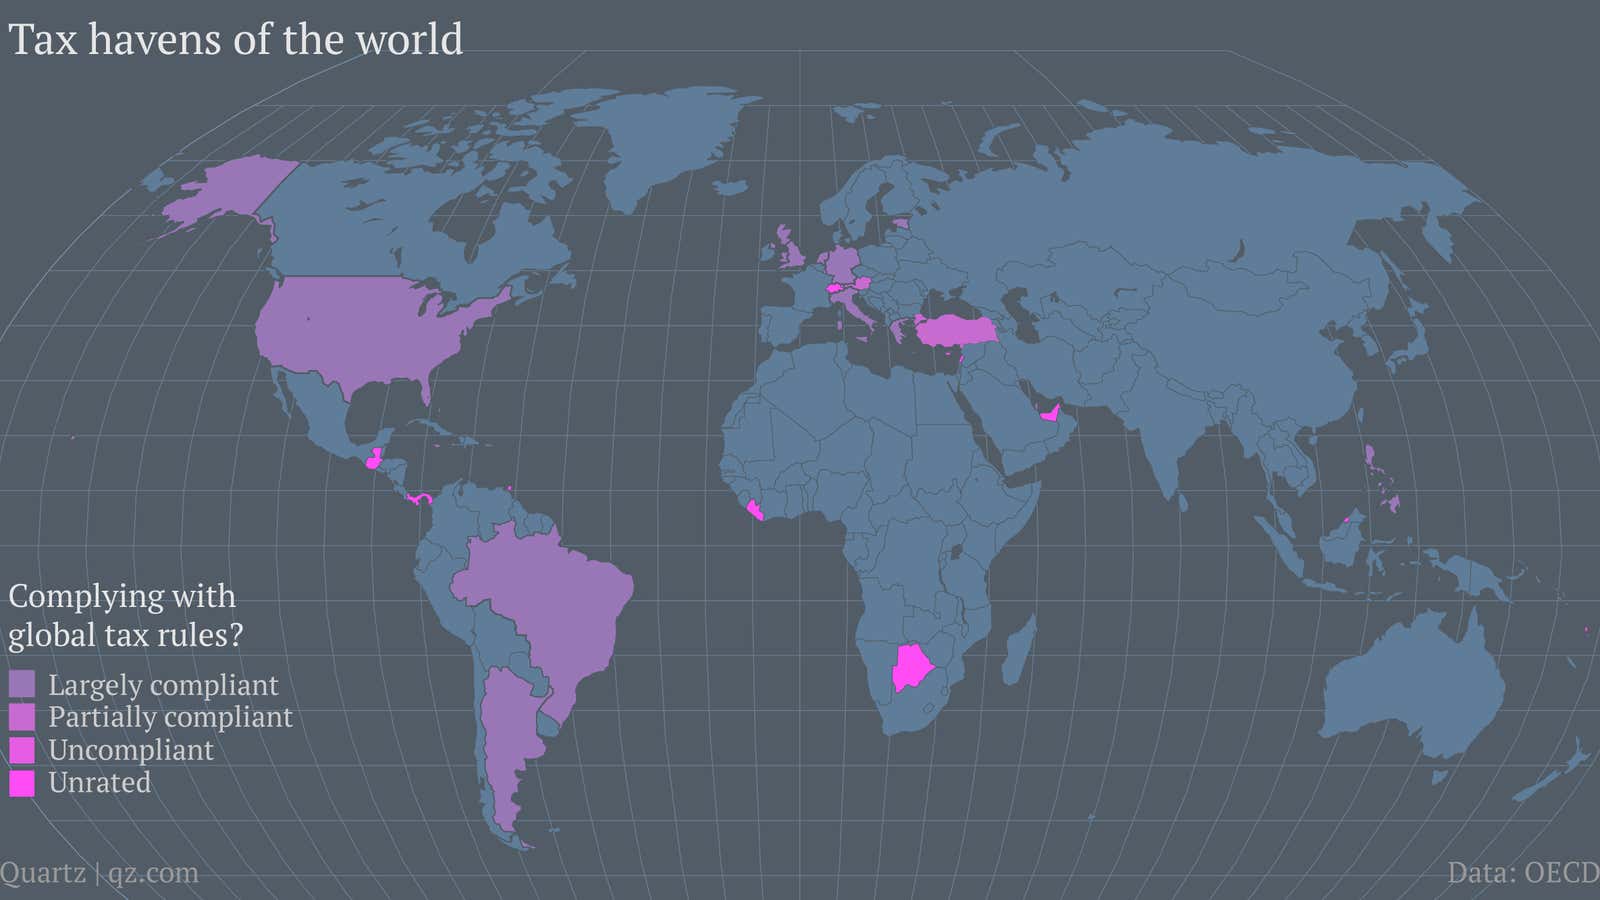 Here is our best approximation of where the world’s tax havens are